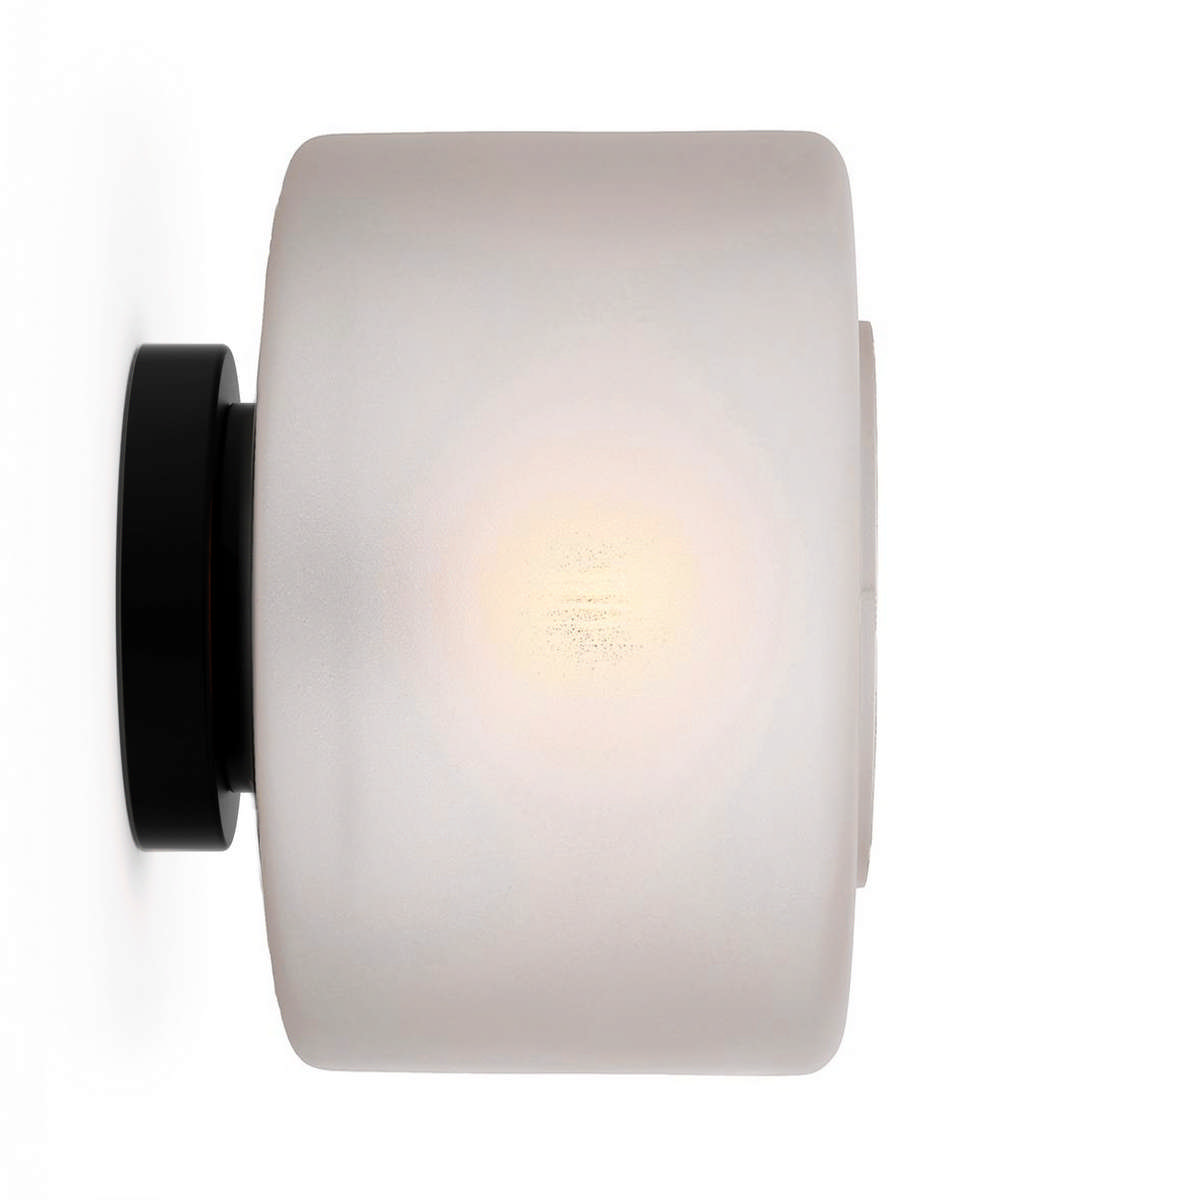 By Eve Eve Wall  Wandlamp Collectie 3